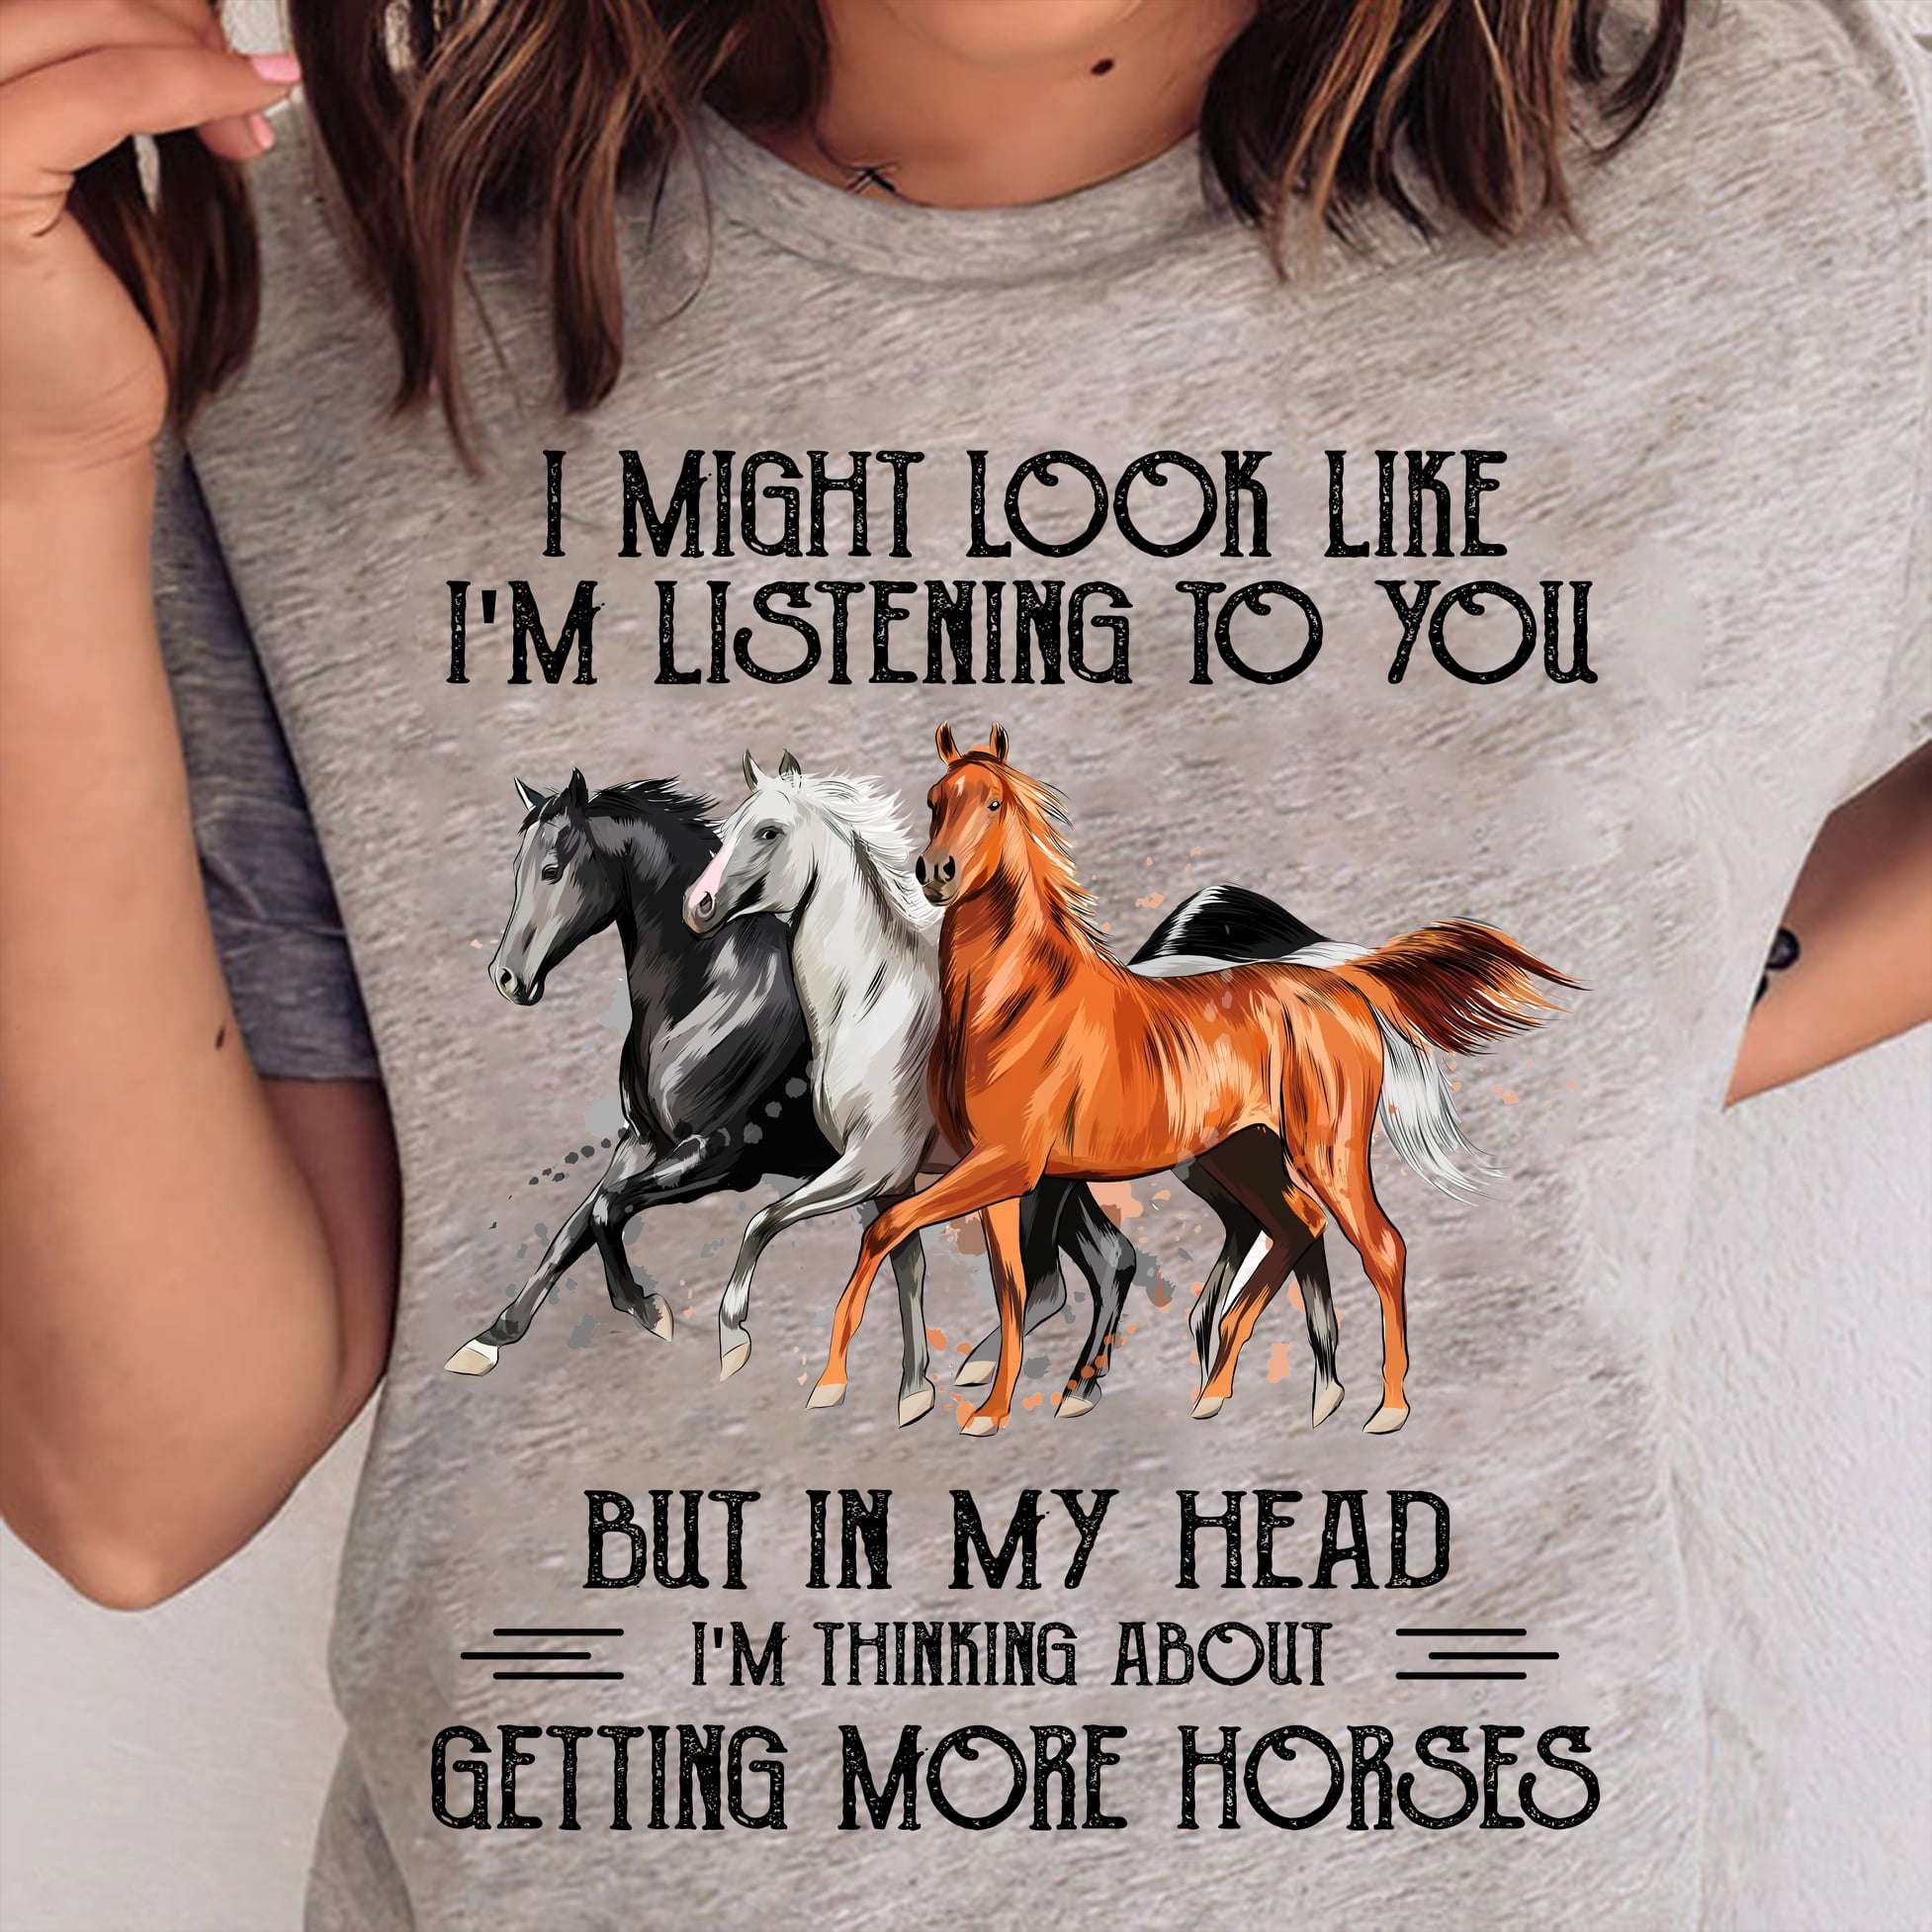 The Horse Tees Gifts - I might look like i'm listening to you but in my head i'm thinking about getting more horse